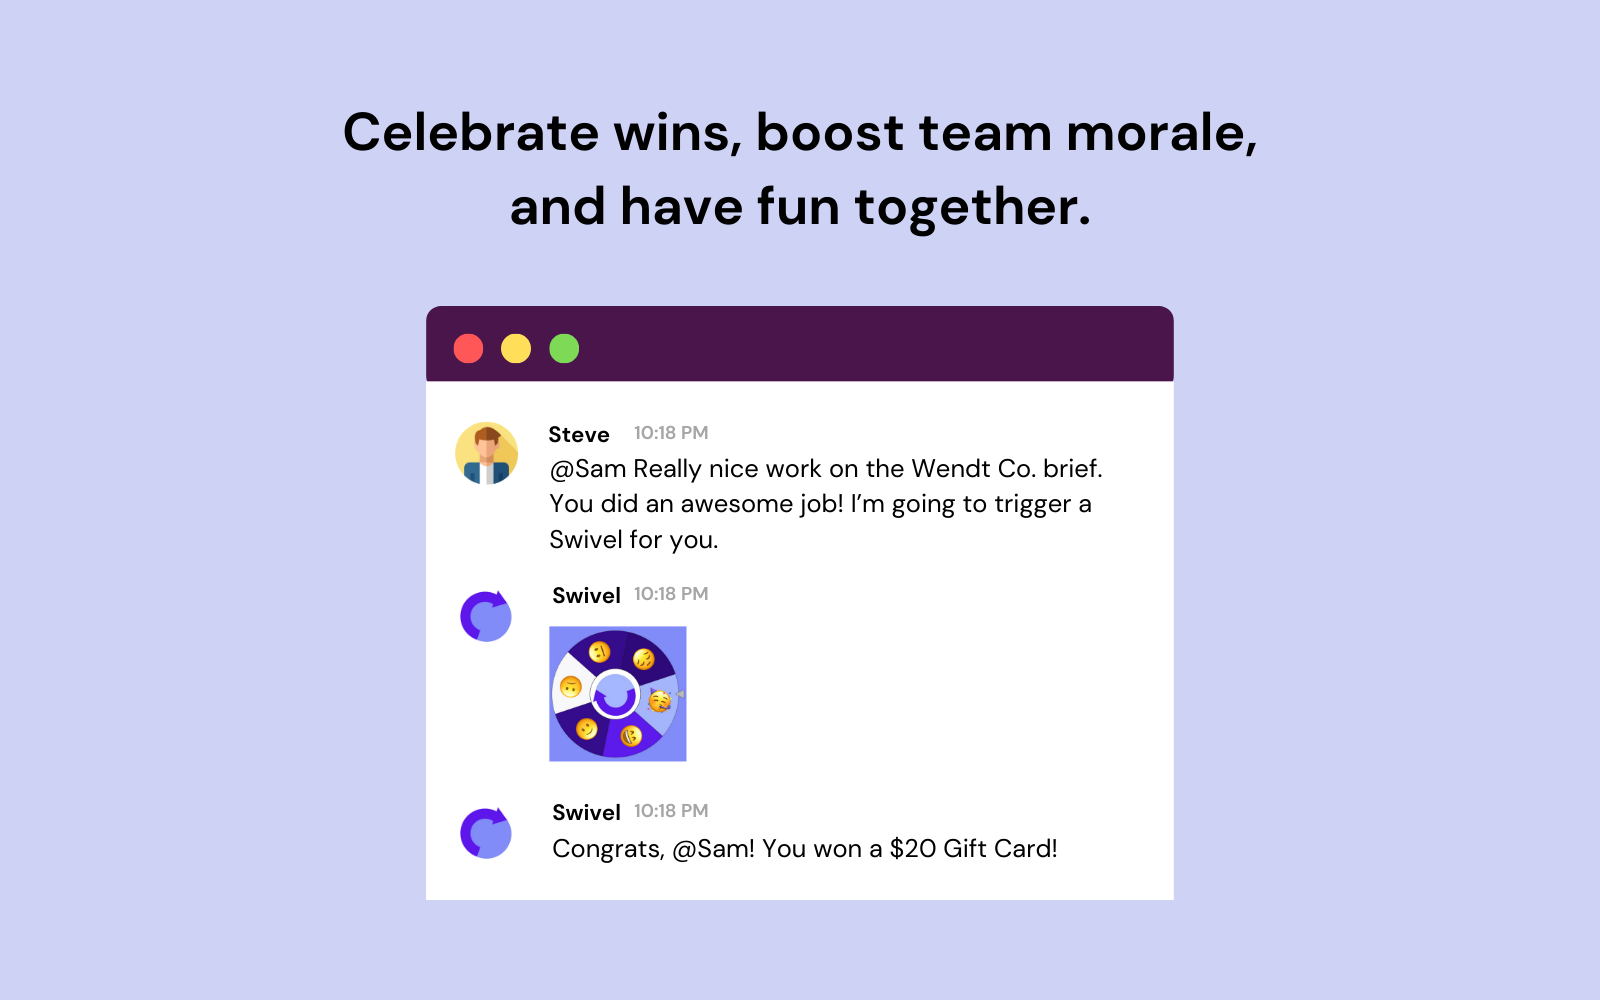 Play Swivel Recognize teammates with Swivel